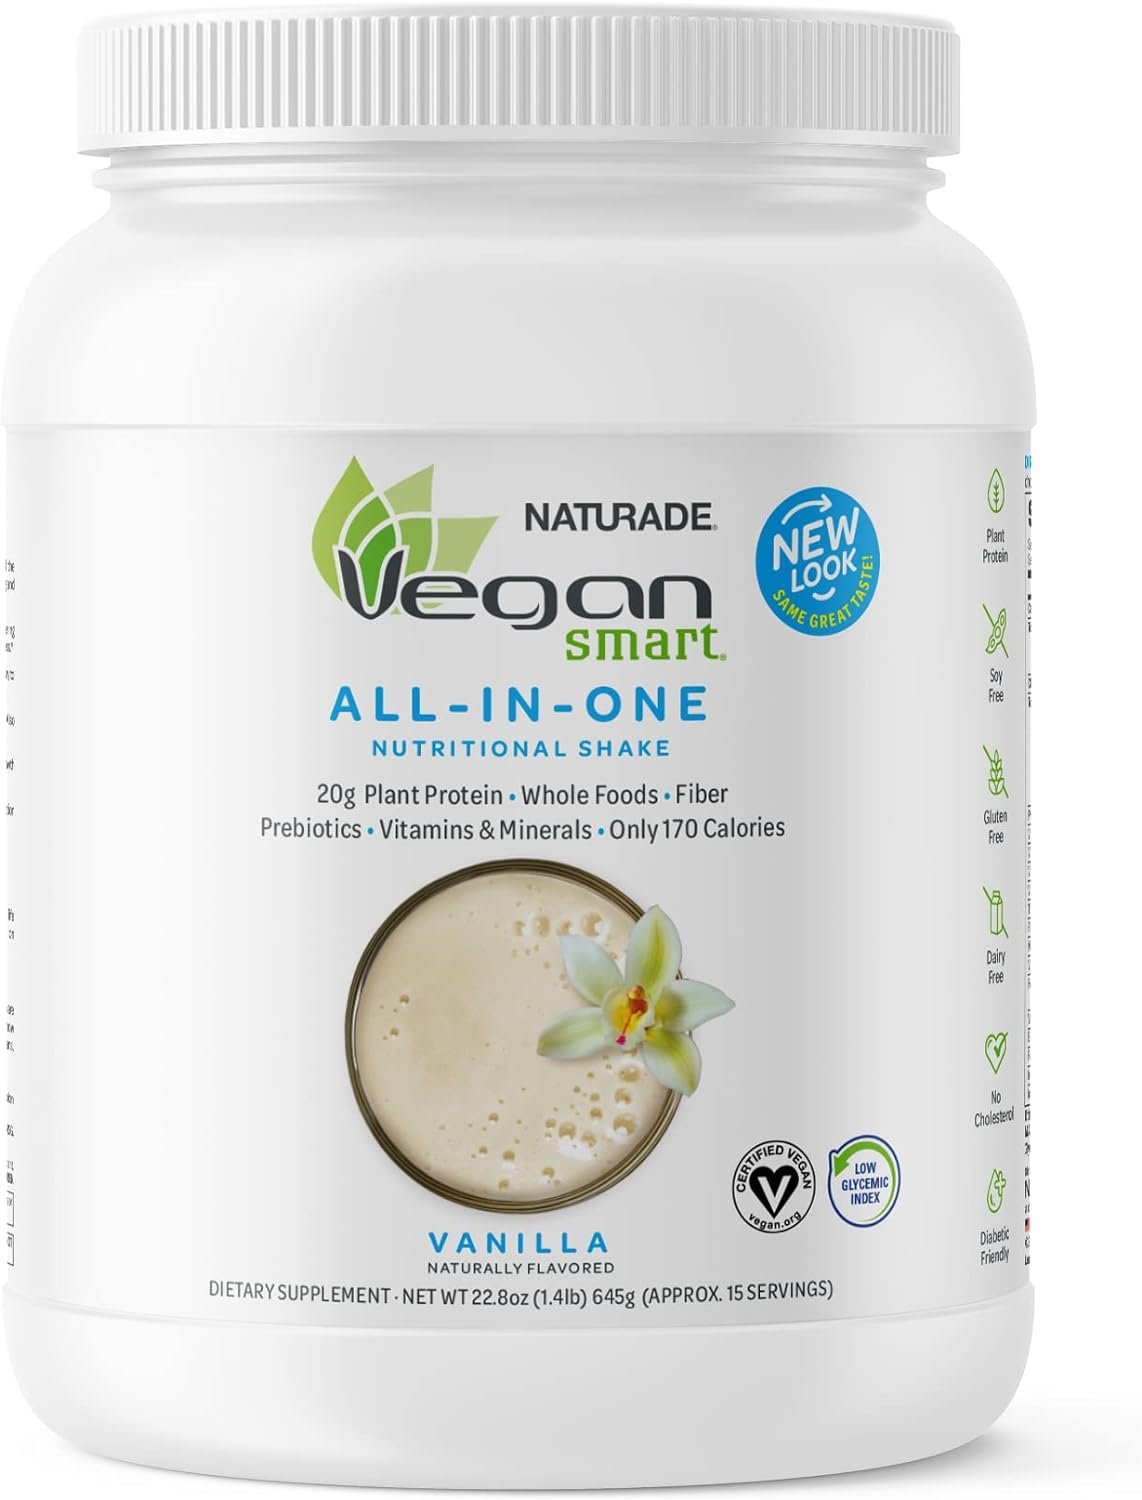 Vegan smart Plant-Based Protein Powder by Naturade